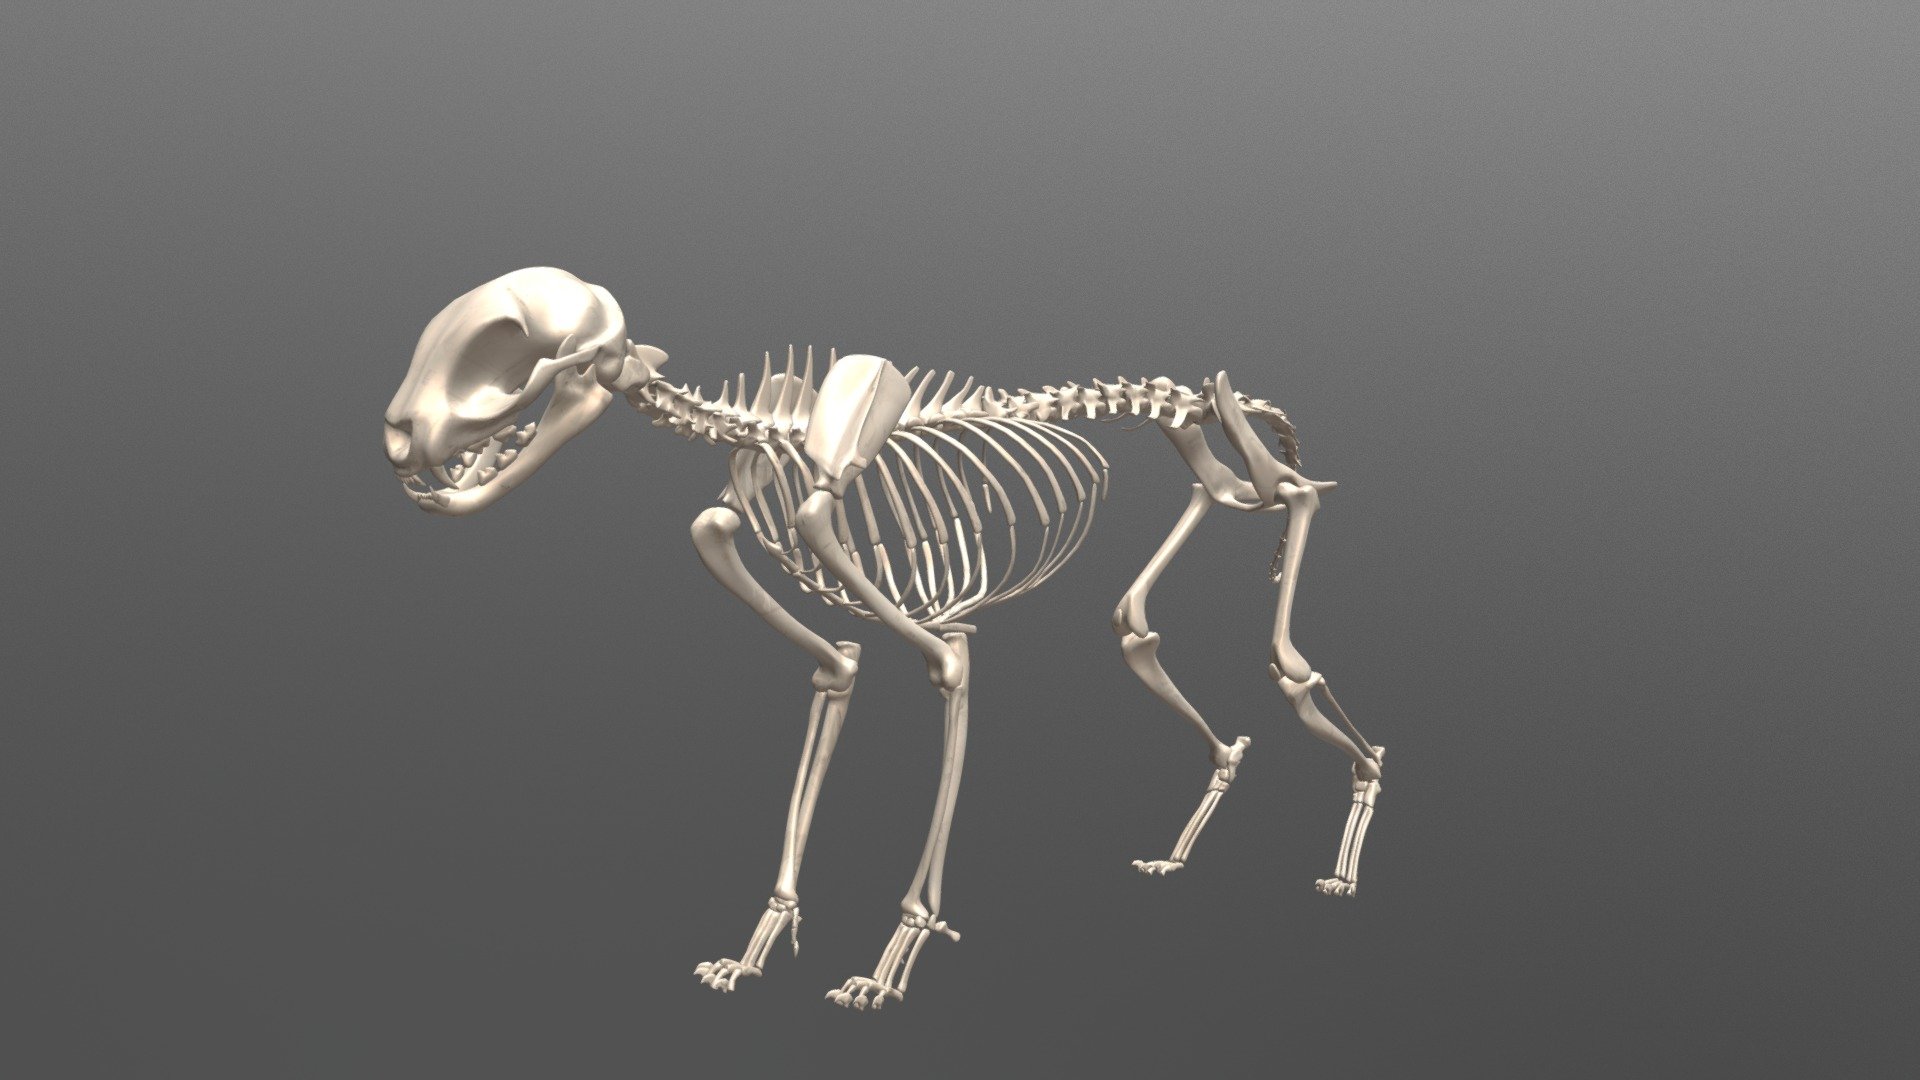 Anatomically based cat skeleton is a part of X-Muscle System distributed as an X-Muscle System Anatomy Bundle  -link removed- - Cat Skeleton - 3D model by karab44 3d model